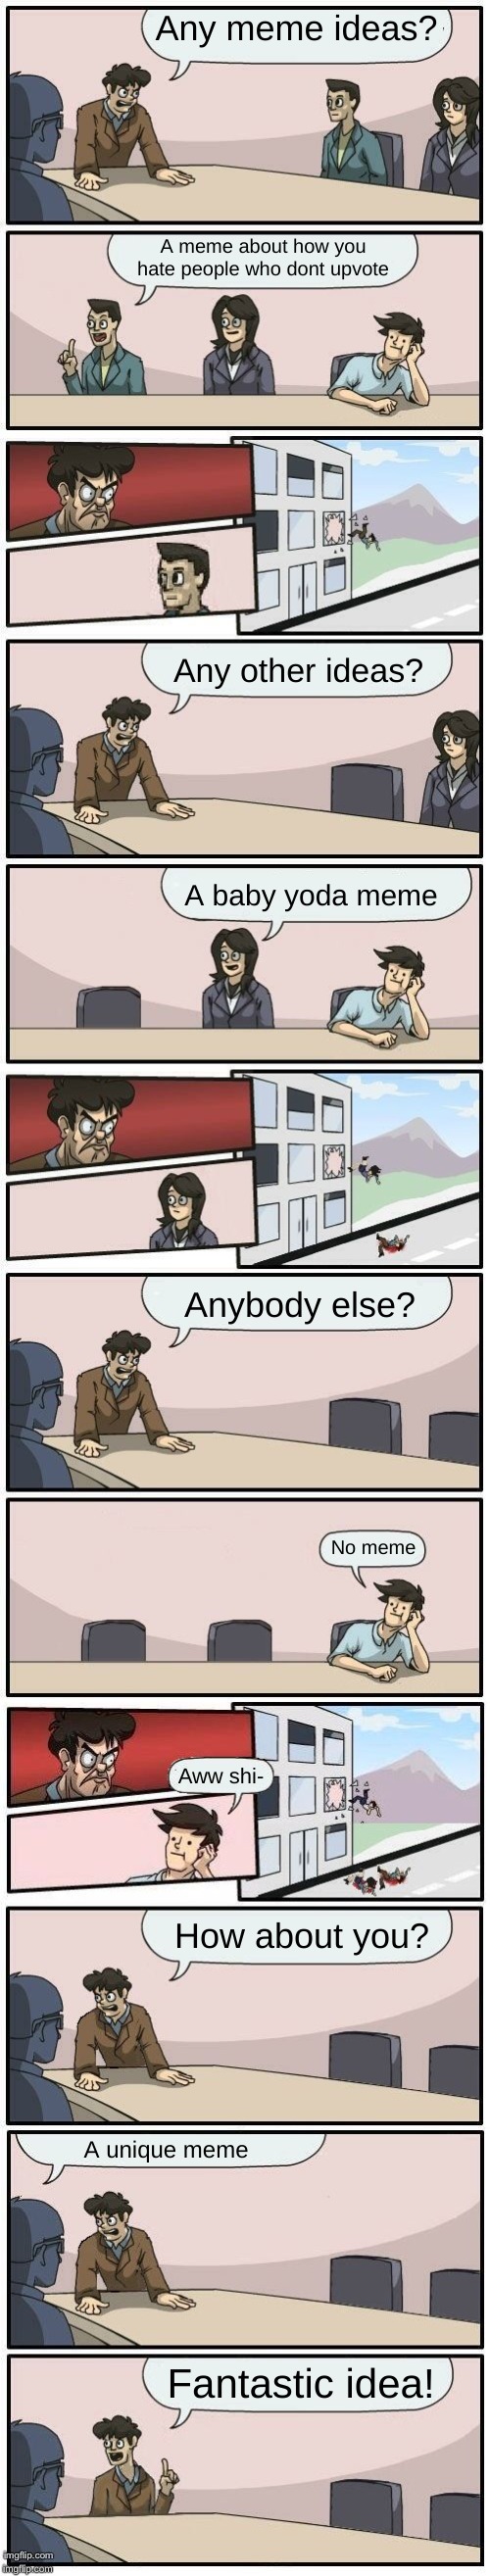 Boardroom Meeting Suggestions Extended | Any meme ideas? A meme about how you hate people who dont upvote; Any other ideas? A baby yoda meme; Anybody else? No meme; Aww shi-; How about you? A unique meme; Fantastic idea! | image tagged in boardroom meeting suggestions extended | made w/ Imgflip meme maker